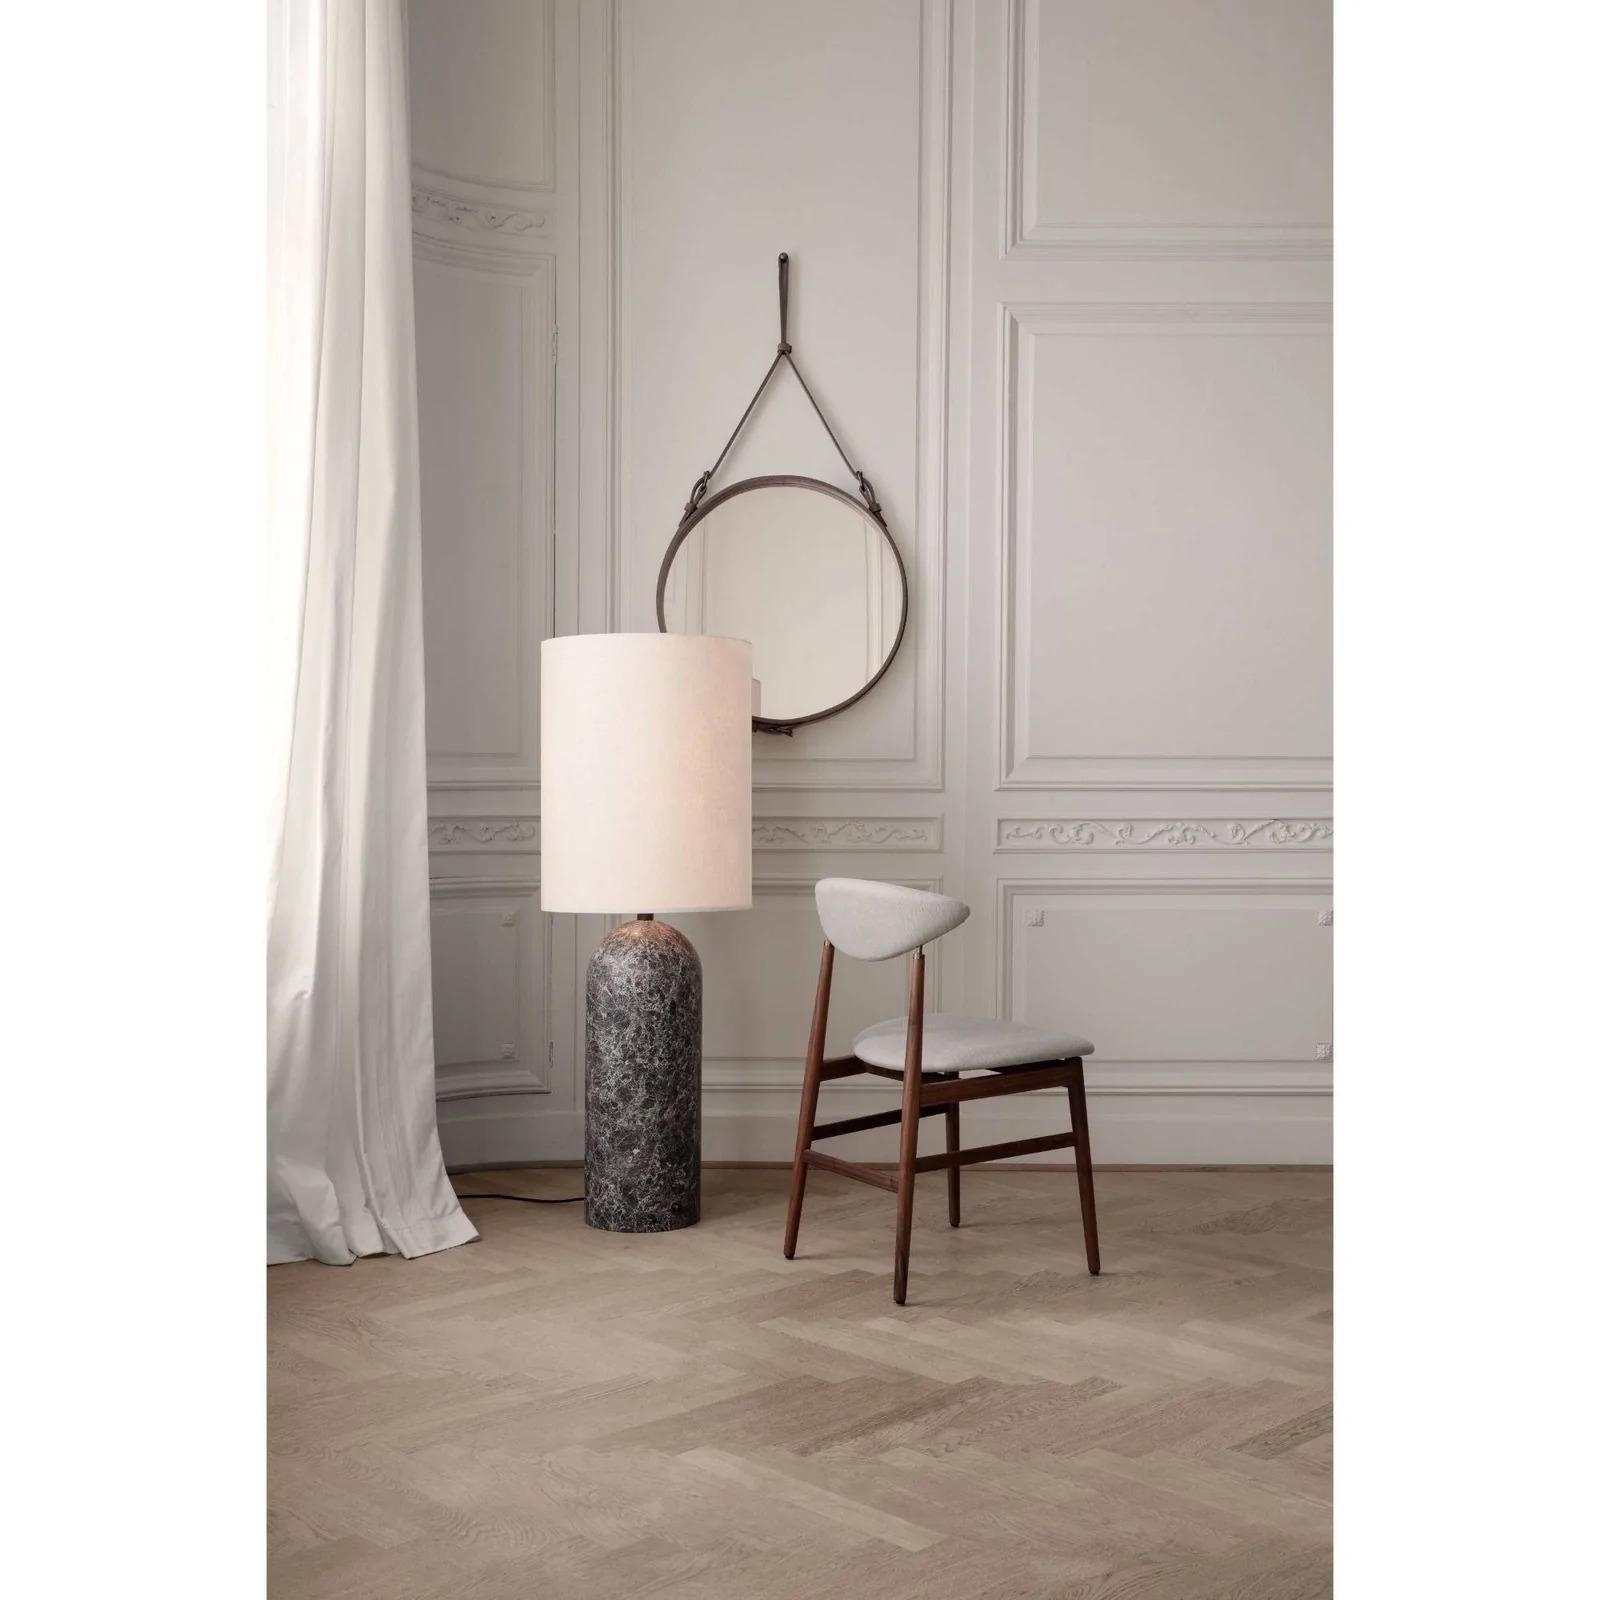 20th Century Gravity Floor Lamp - XL High, Black Marble, Canvas For Sale